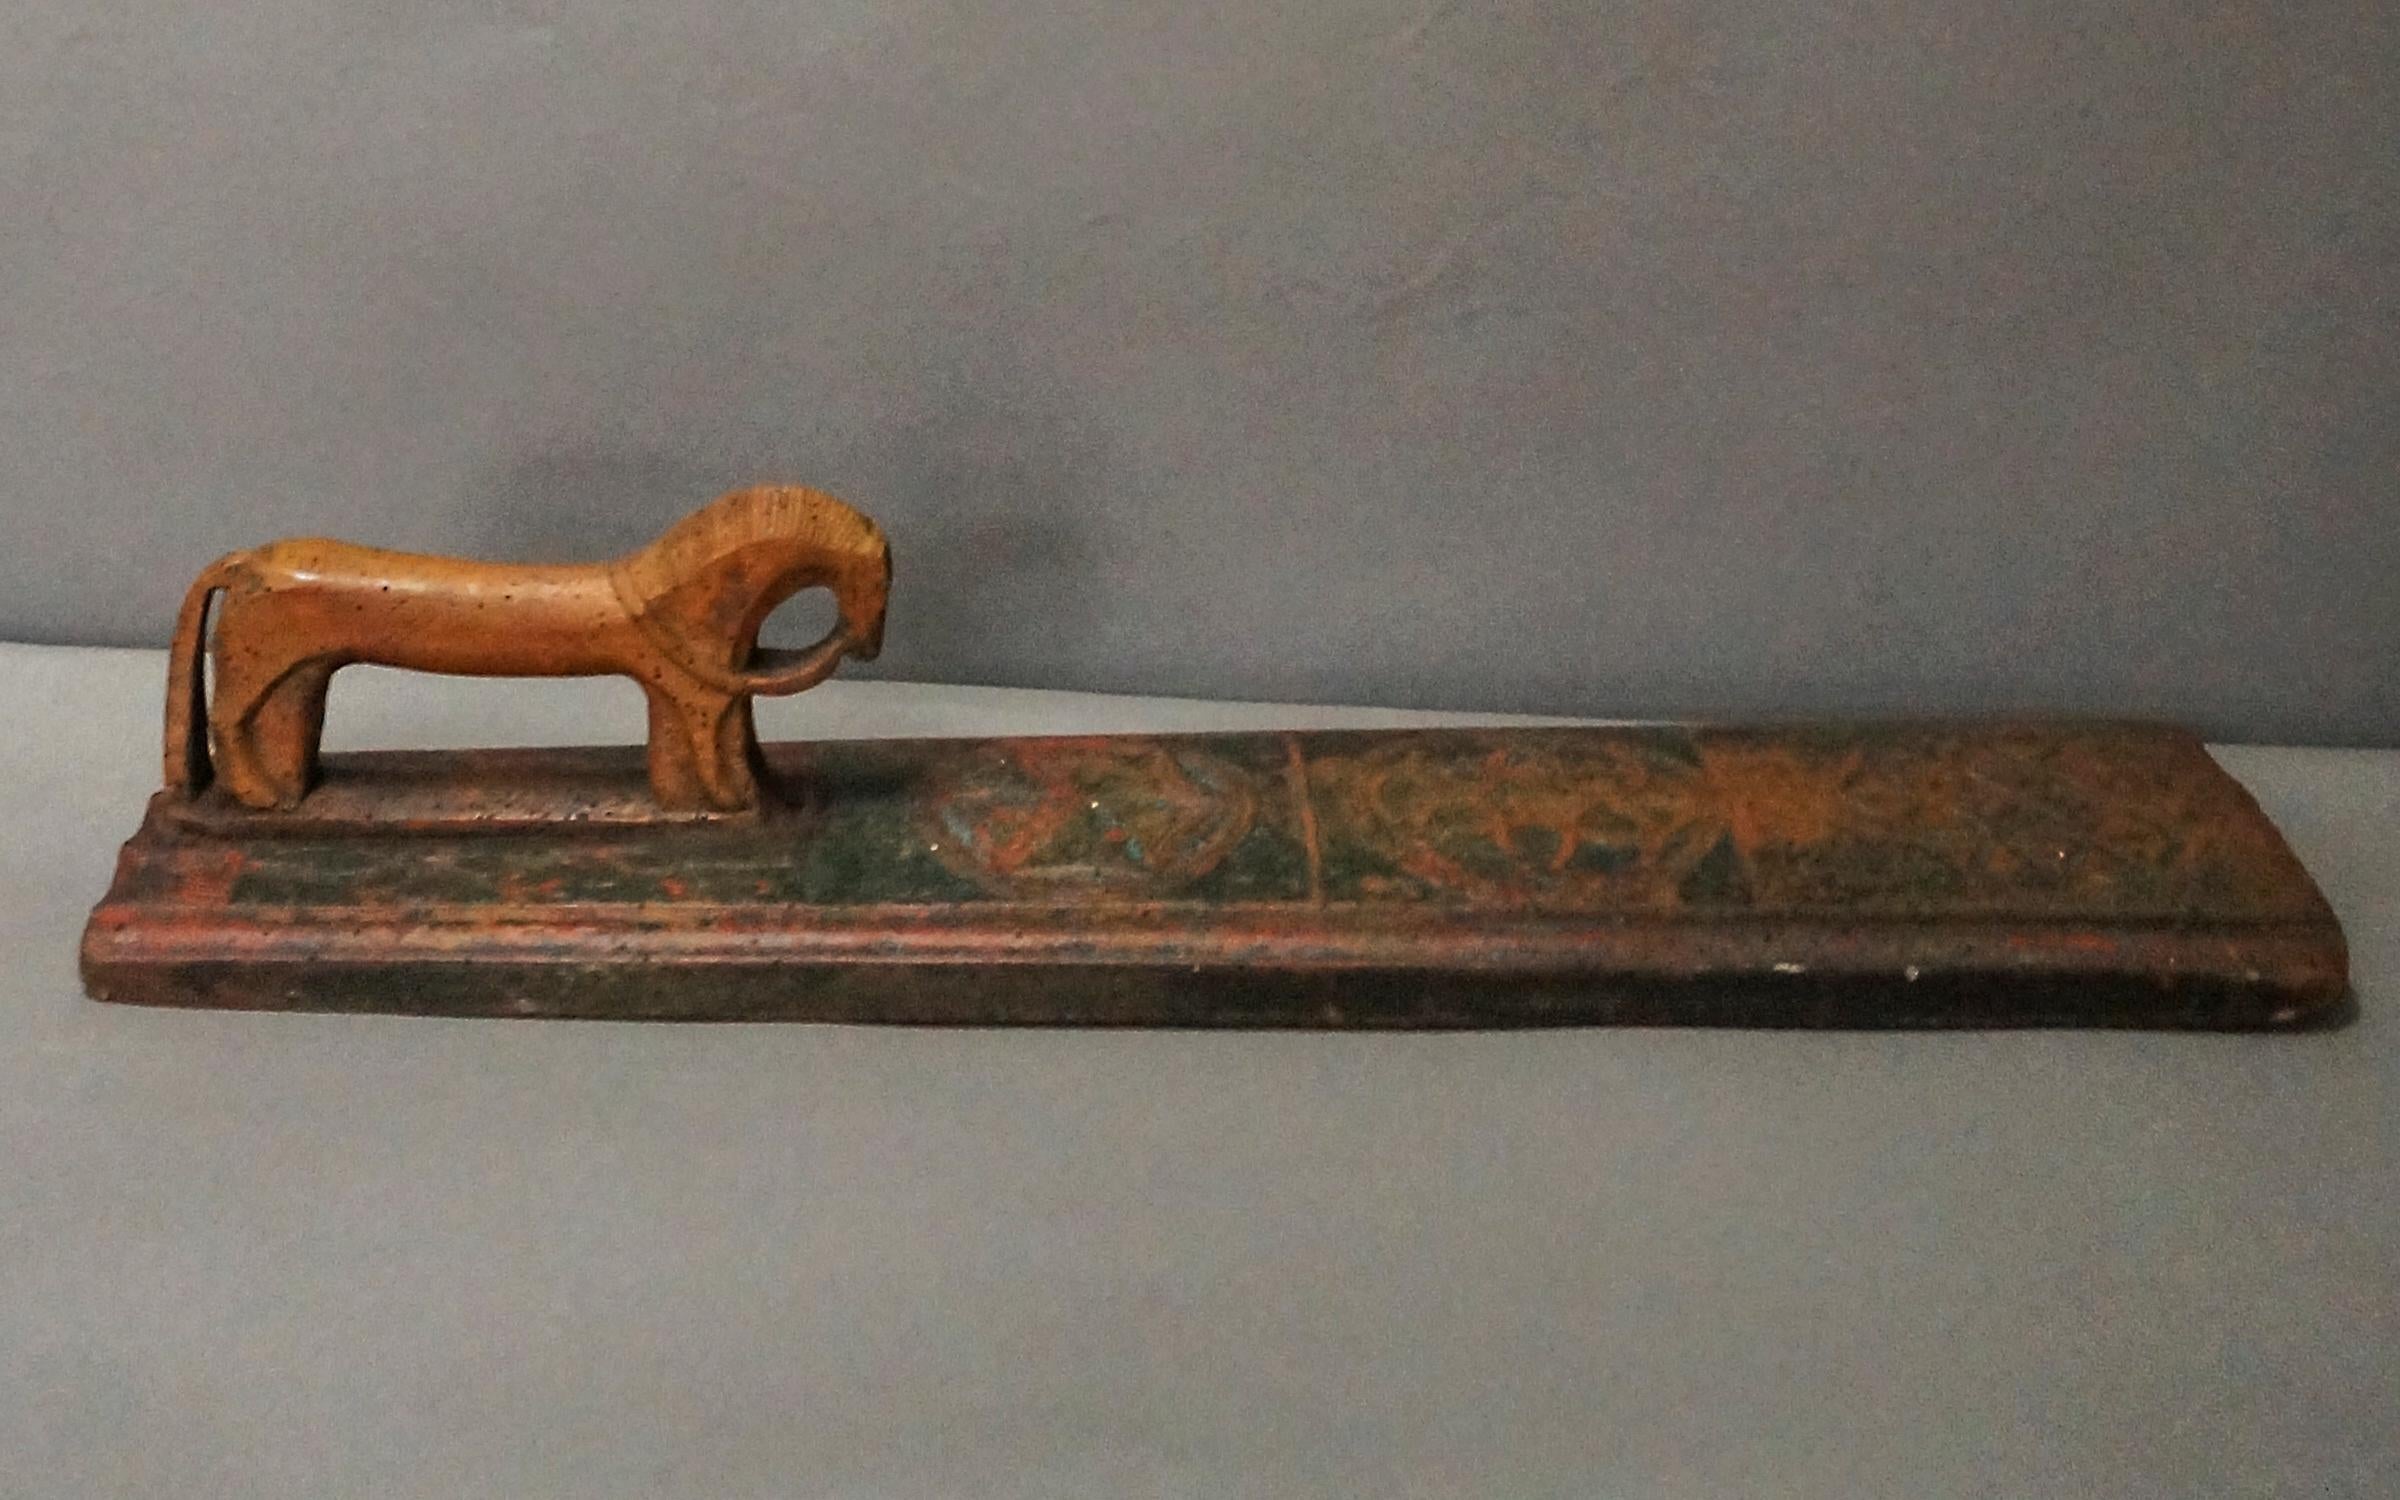 Mangle board in original green and salmon paint, Sweden dated 1818. The horse-shaped handle has an incised main and articulated reins and tail. On either side of the horse are twining vines in baskets. On the board itself are three compass-drawn